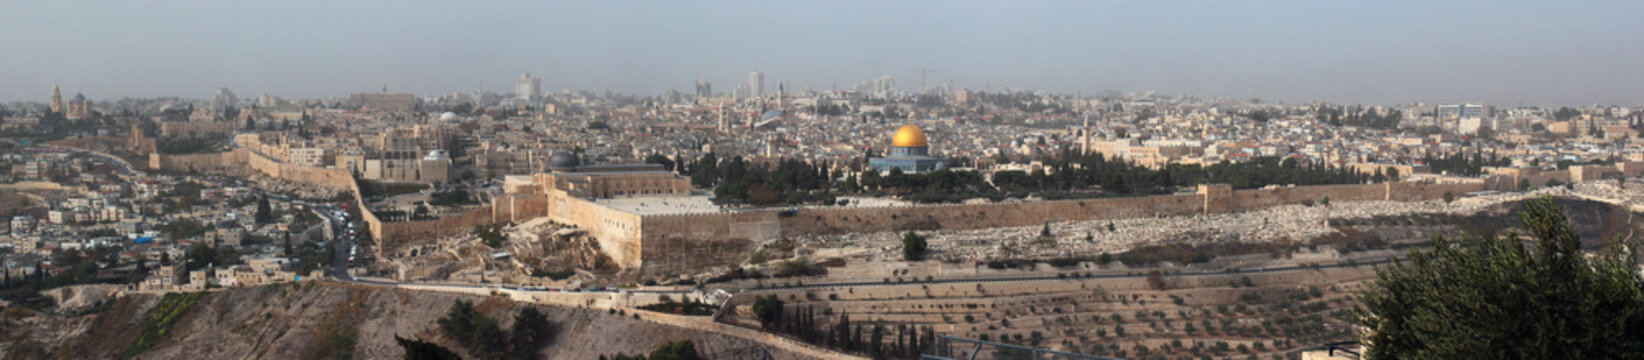 Panorama of central Jerusalem, Israel. View from the Mount of Ol